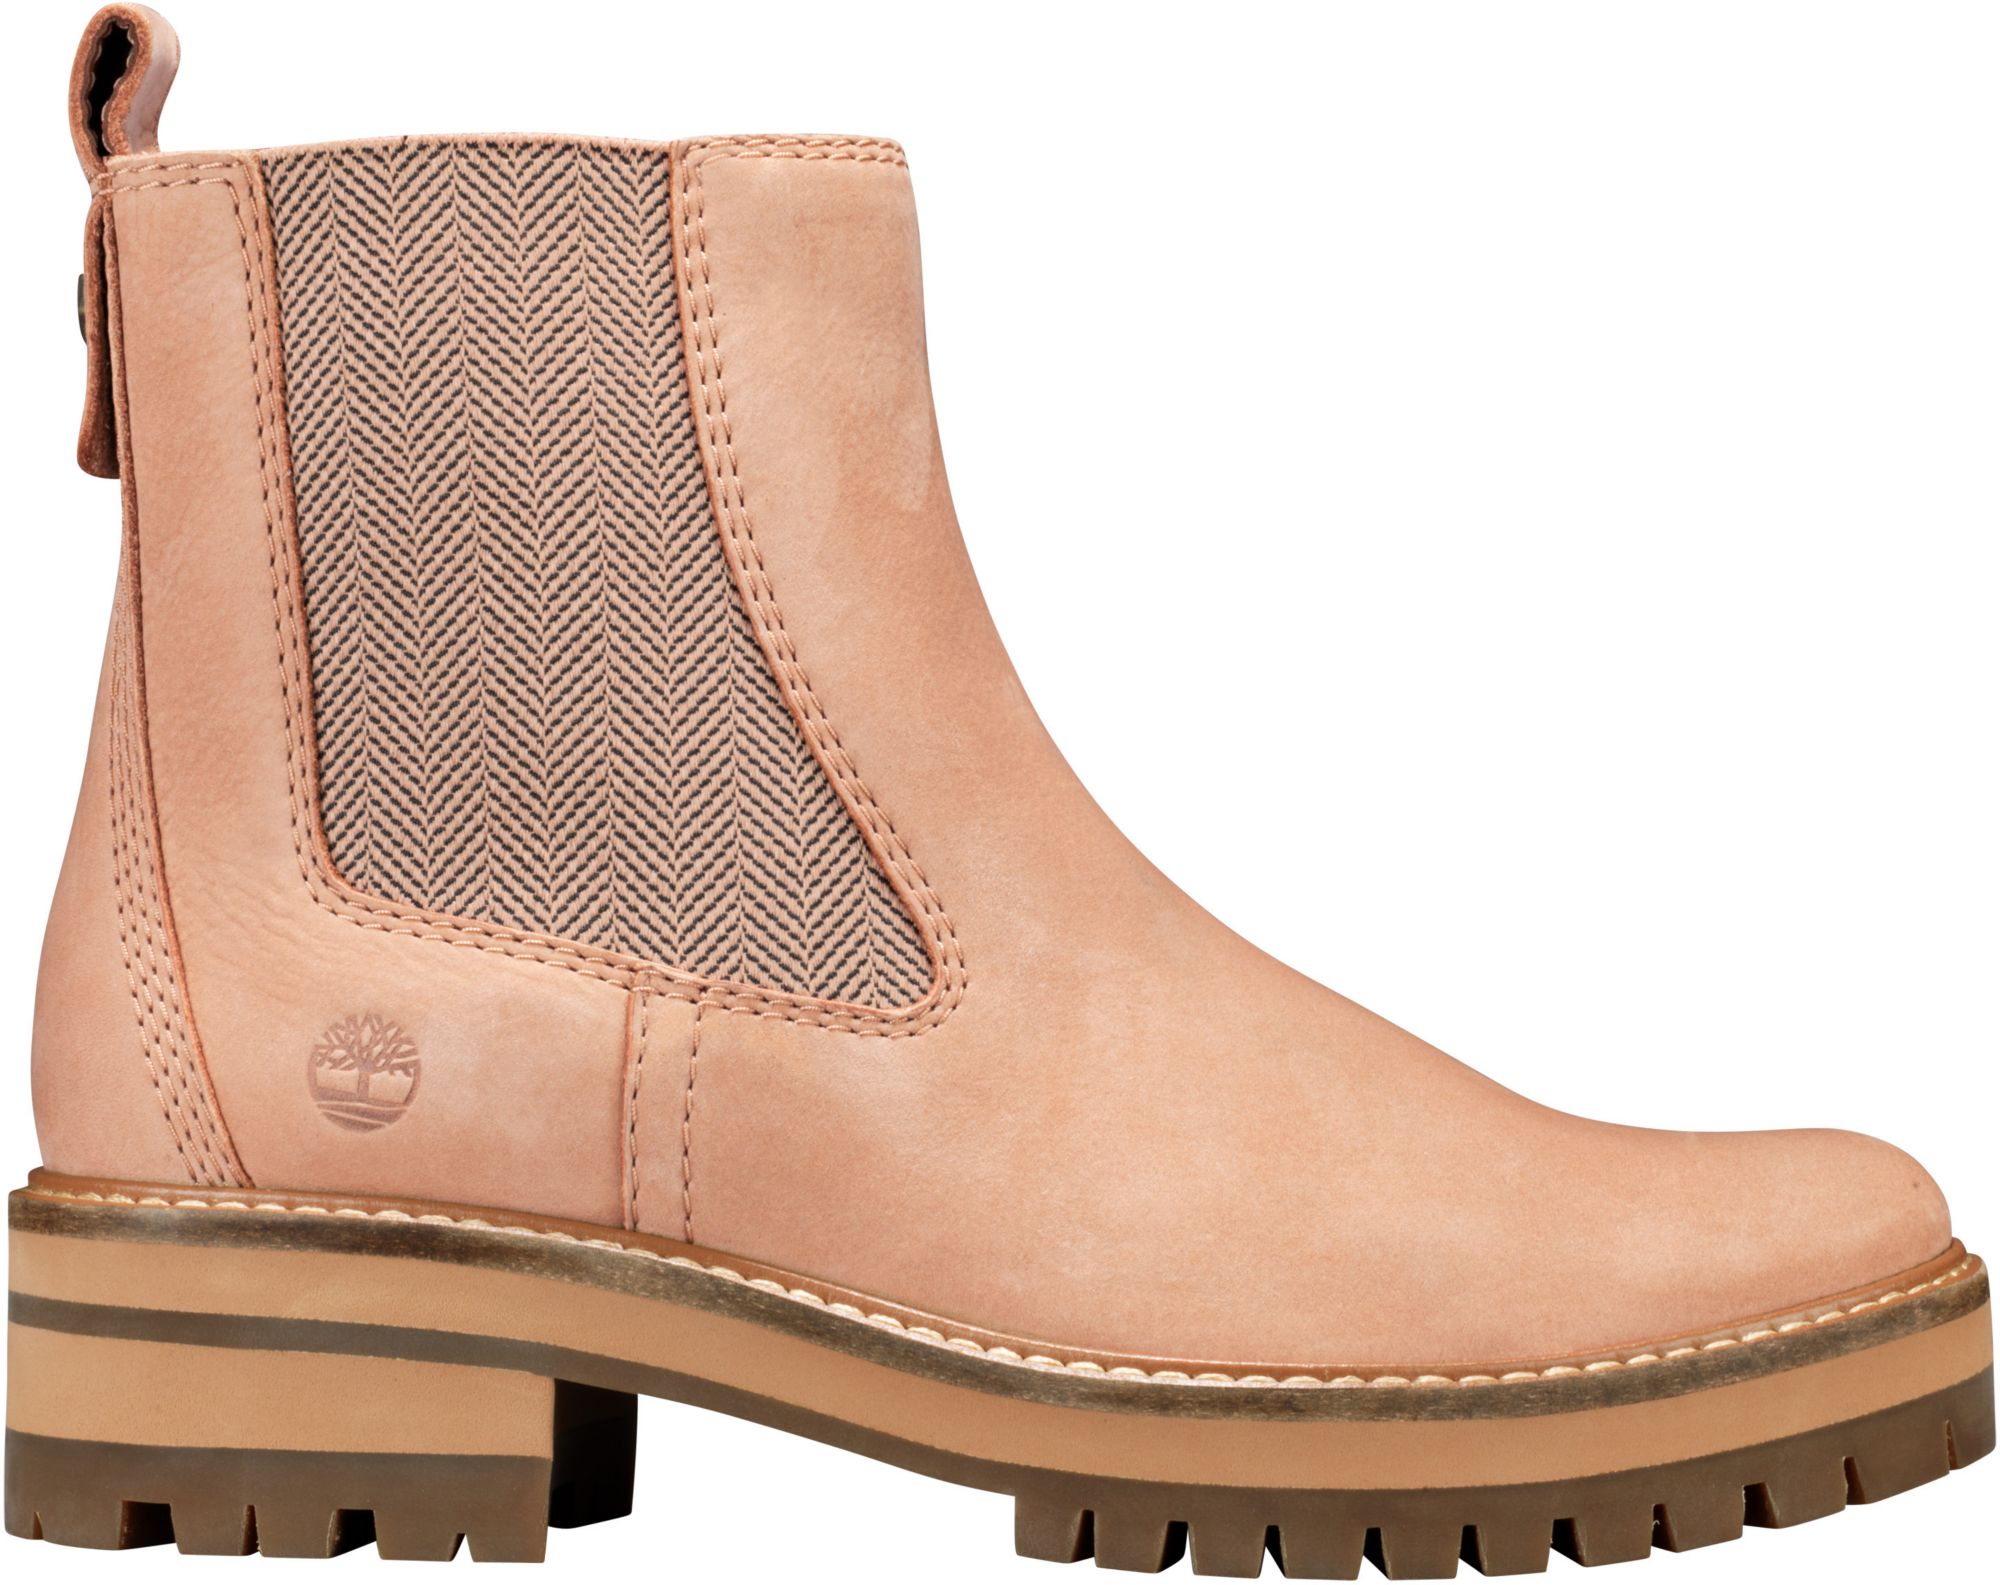 womens boots similar to timberland